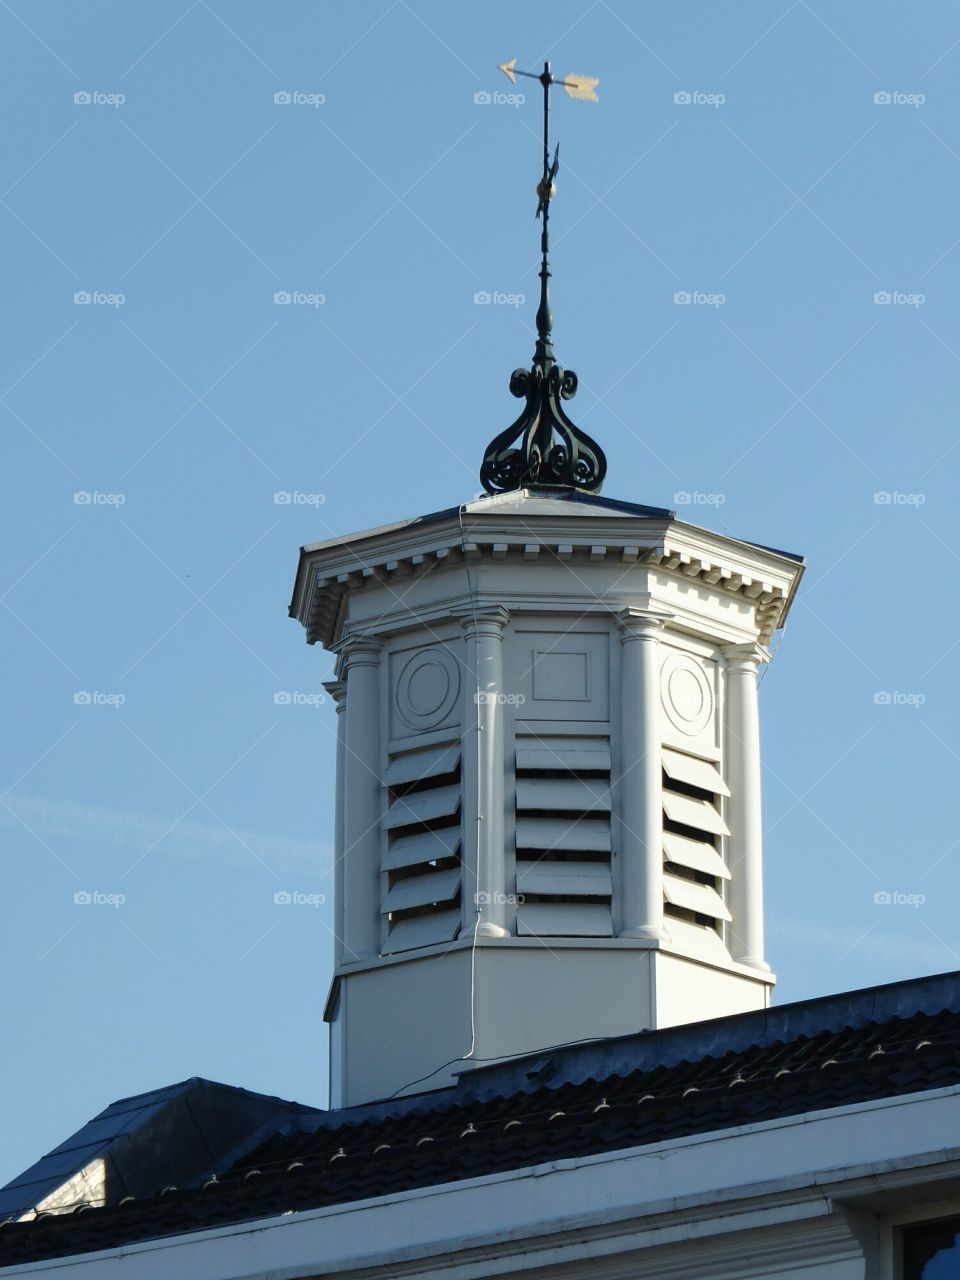 Tower on the roof of an old building